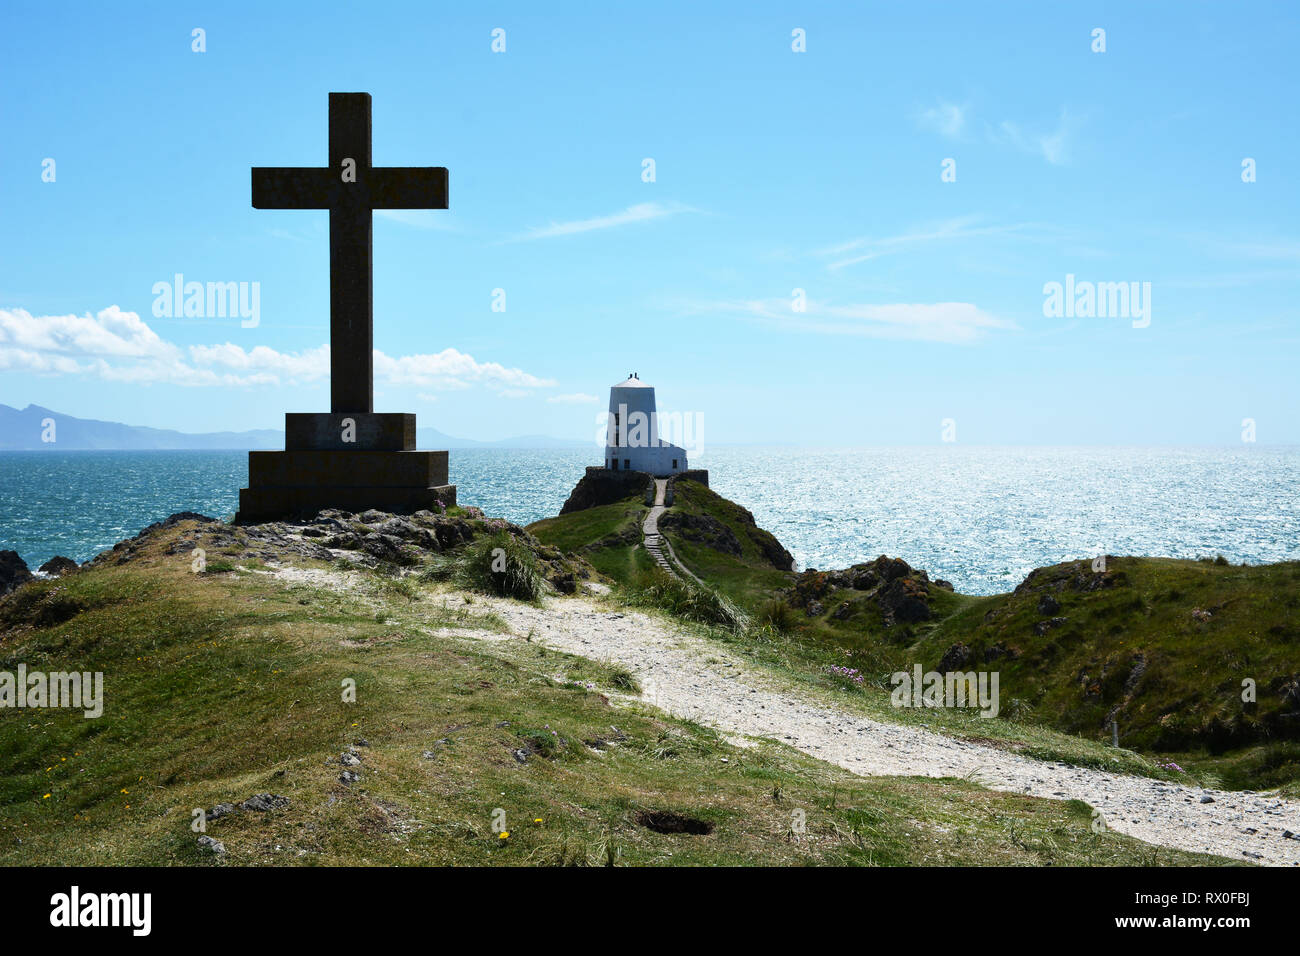 The cross and Twr Mawr lighthouse on Llanddwyn Island off the South West coast of Anglesey in North Wales. Stock Photo